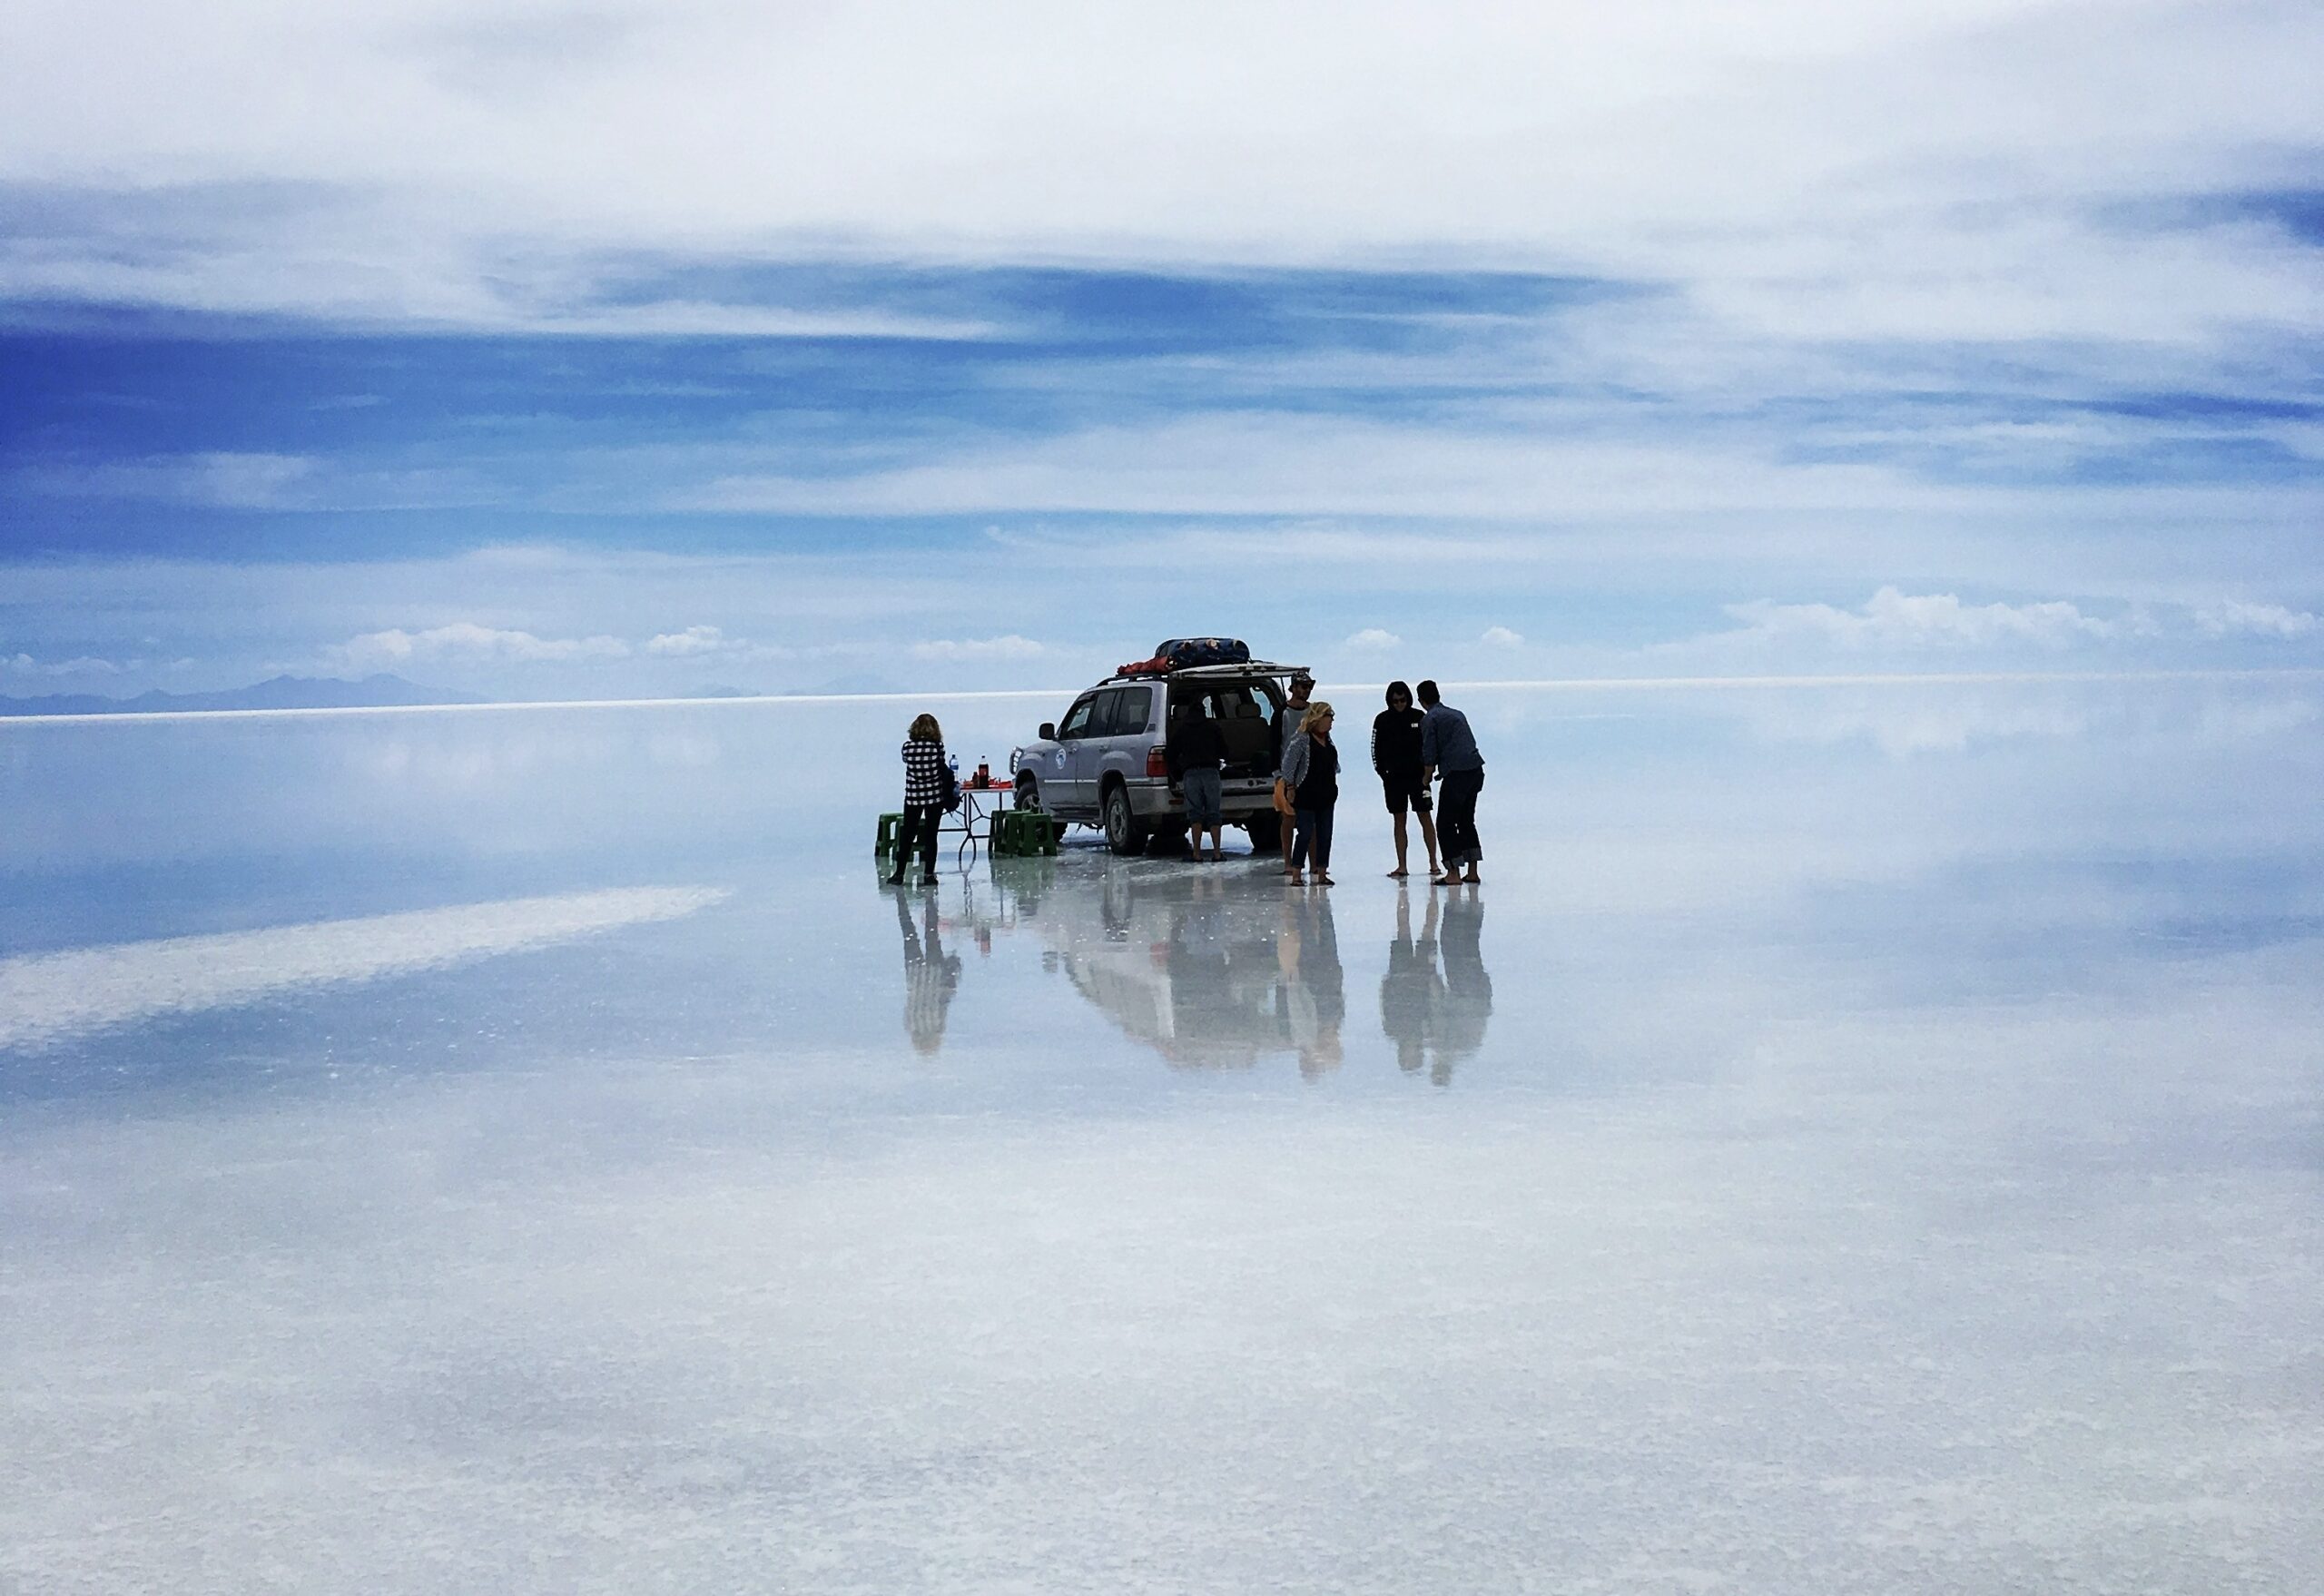 Check out the Uyuni salt flat experience and what travelers can expect. 
pictured: a Black family setting up to relax and enjoy the views of the Uyuni salt flat 